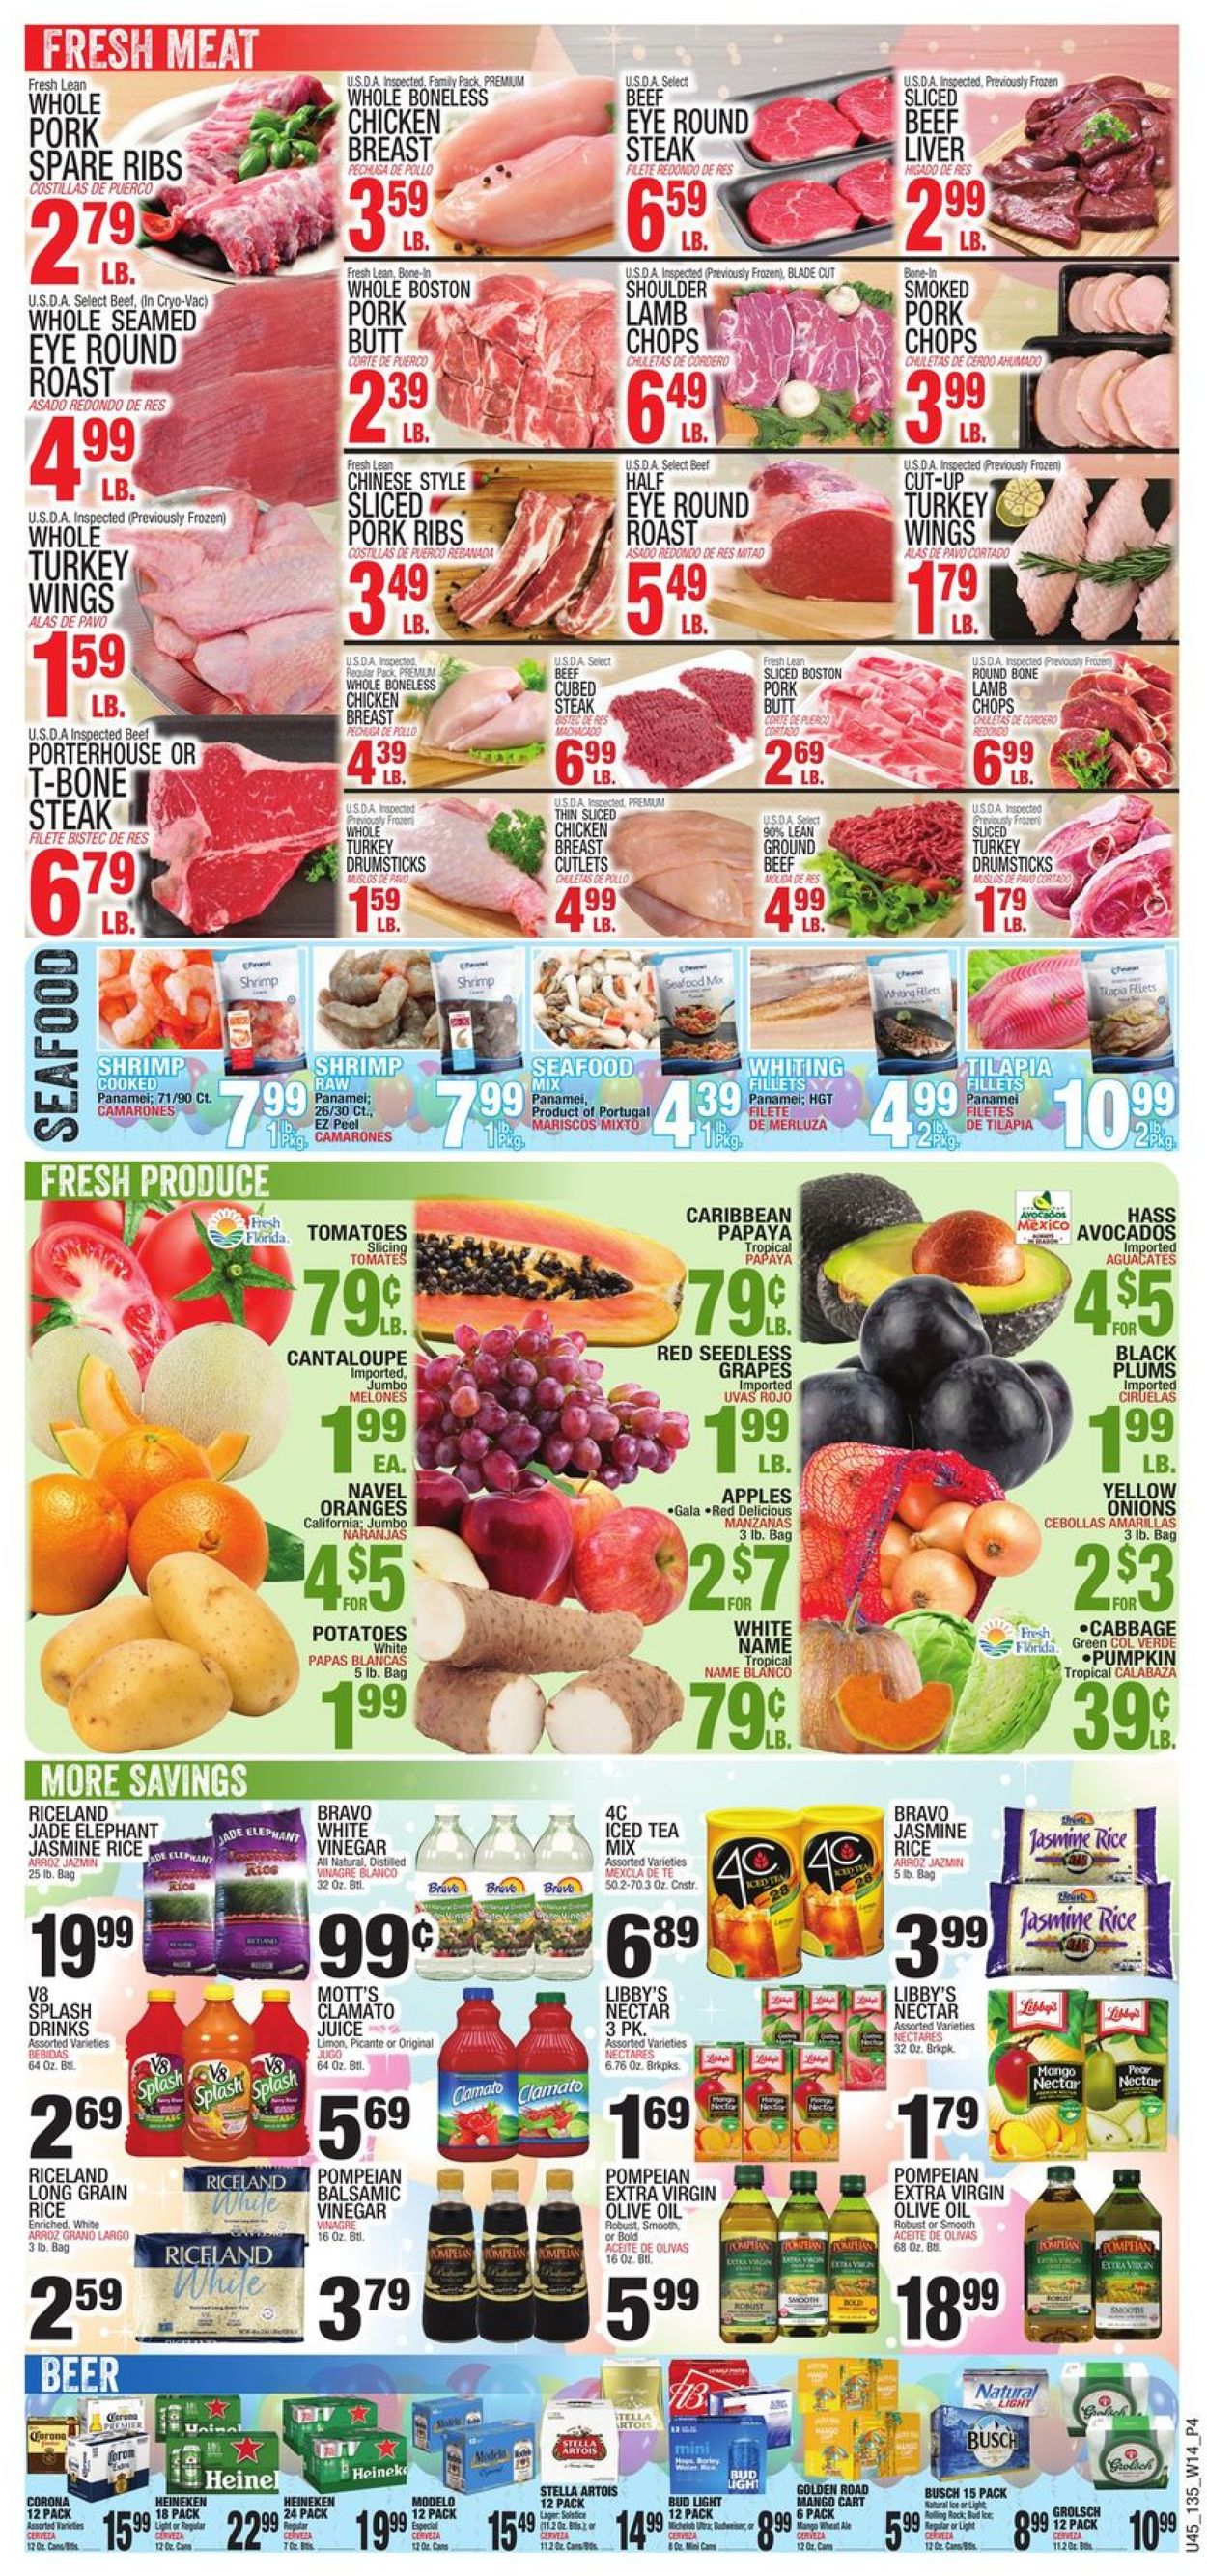 Bravo Supermarkets Current weekly ad 03/31 - 04/06/2022 [4] - frequent ...